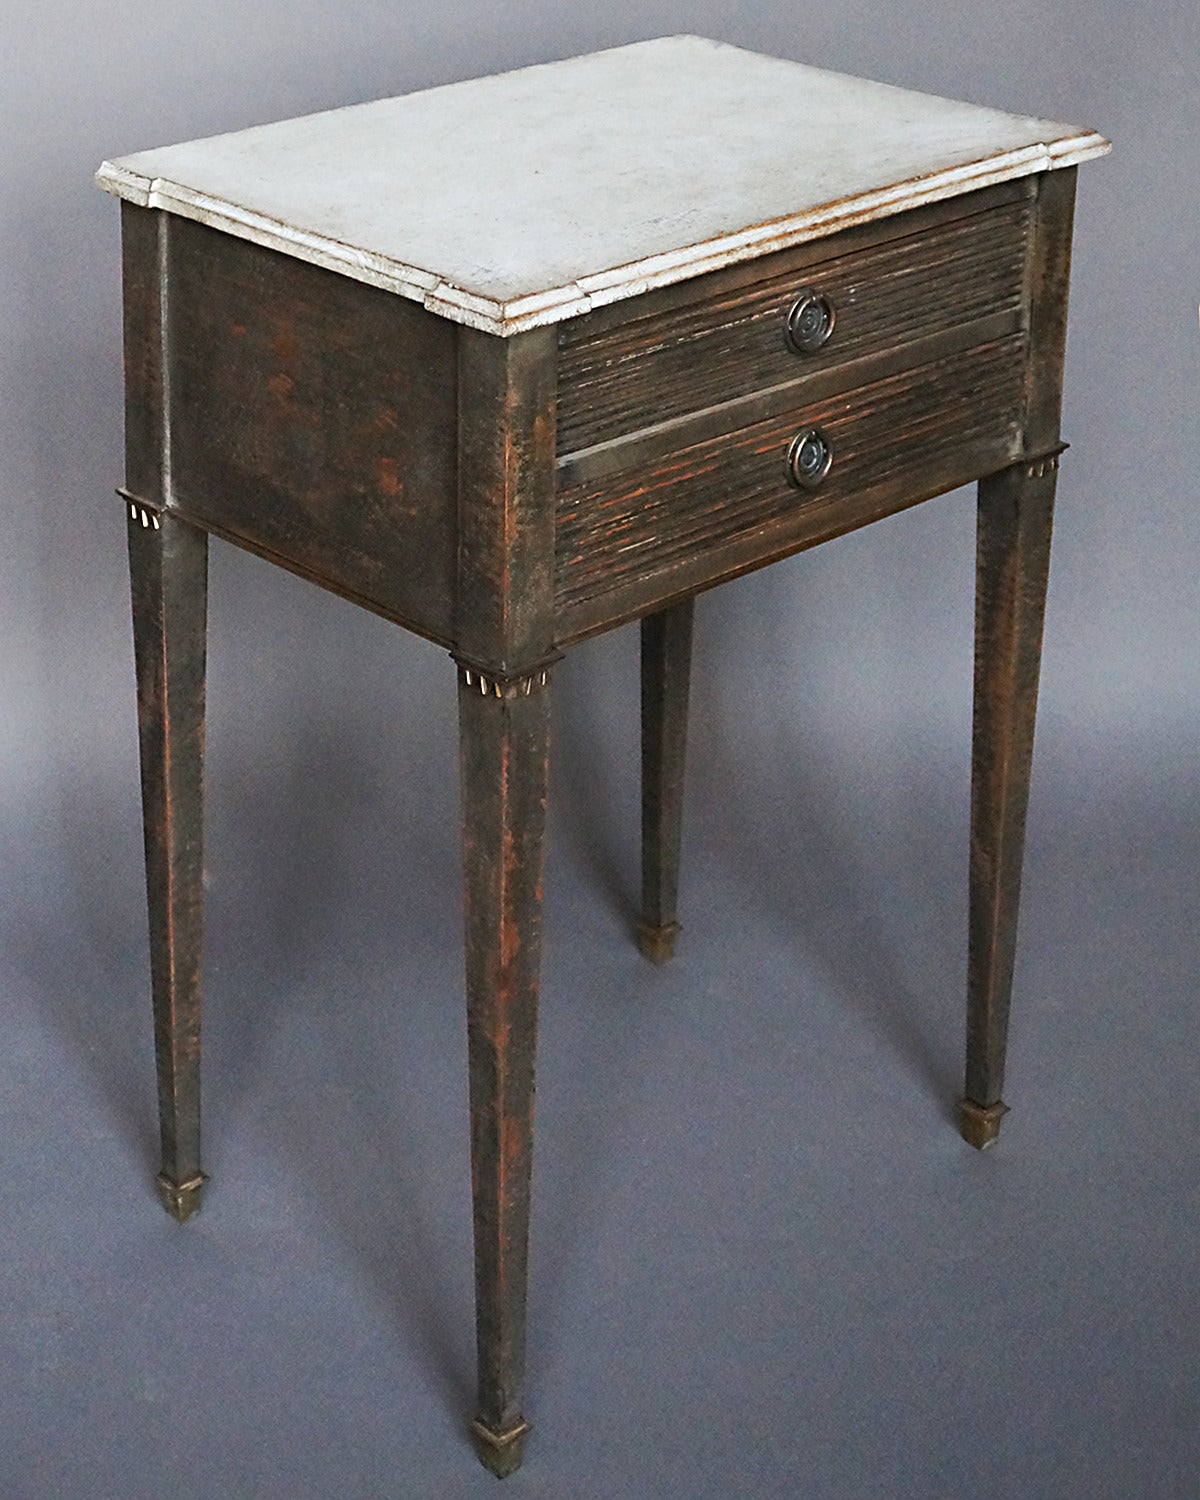 Two drawer work table, Sweden circa 1870, with shaped top, reeded drawers and brass details.